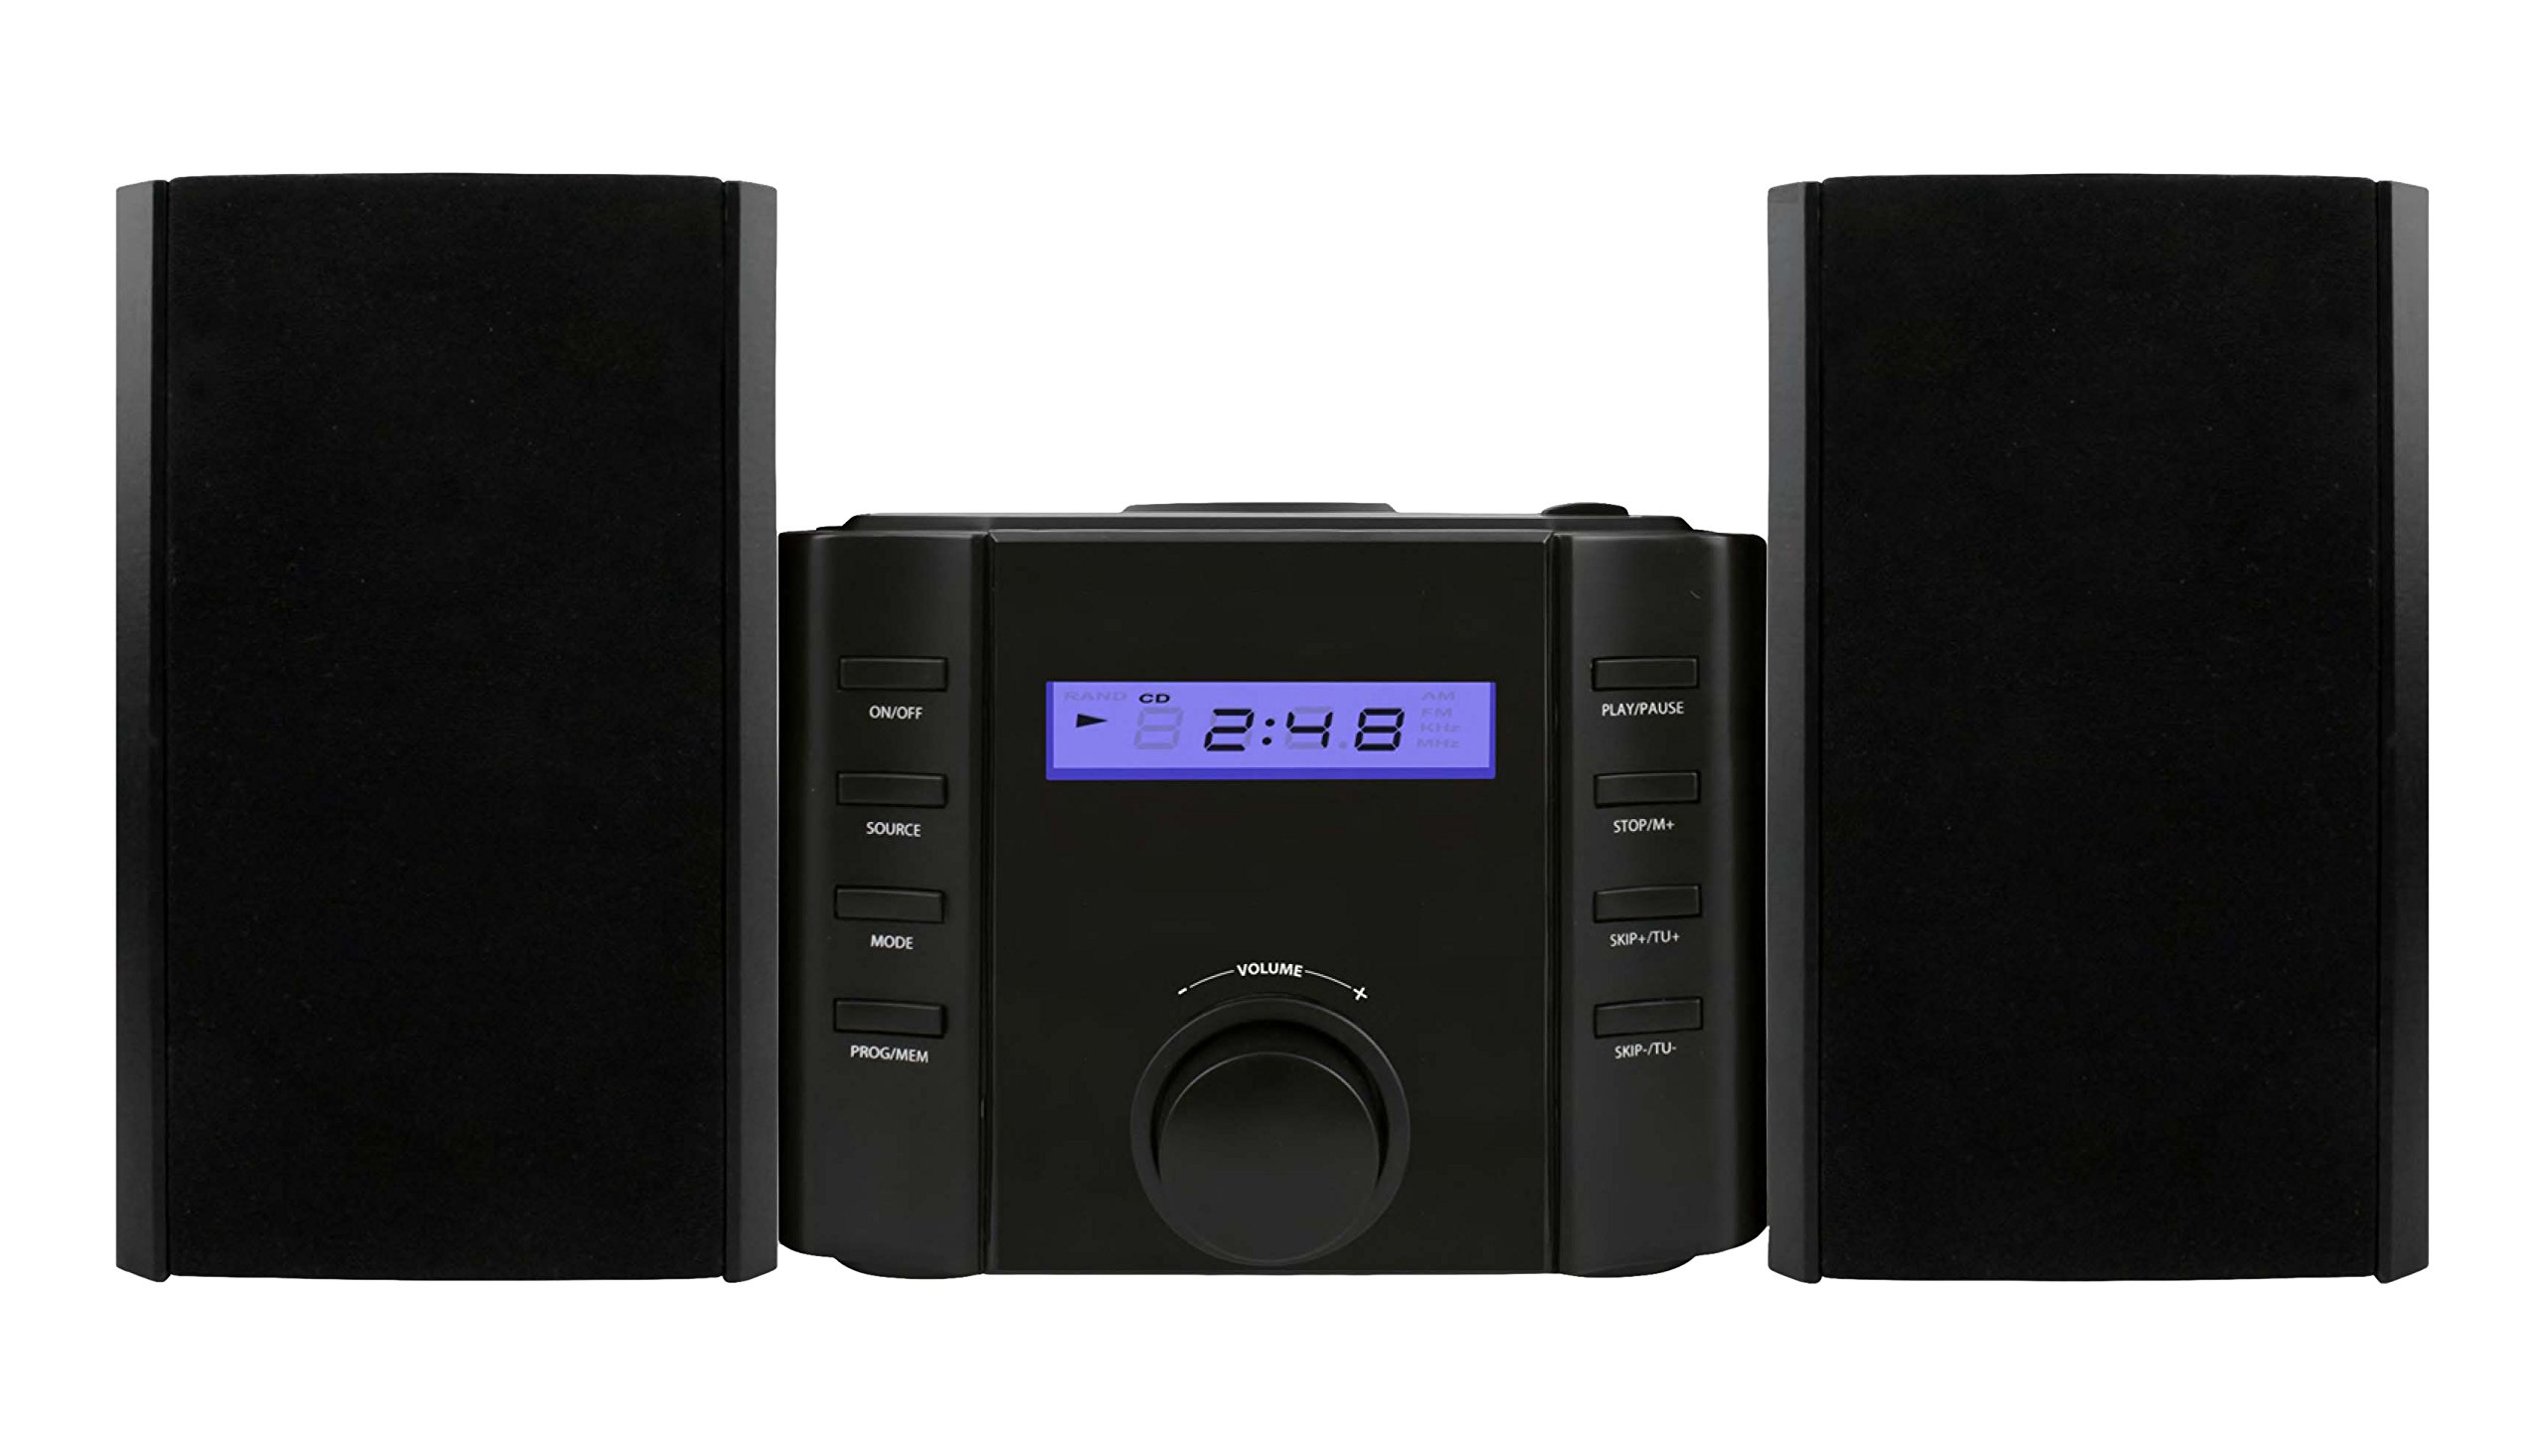 Sylvania Bluetooth(R) CD Micro System Stereo with Radio (SRCD804BT) - image 1 of 3